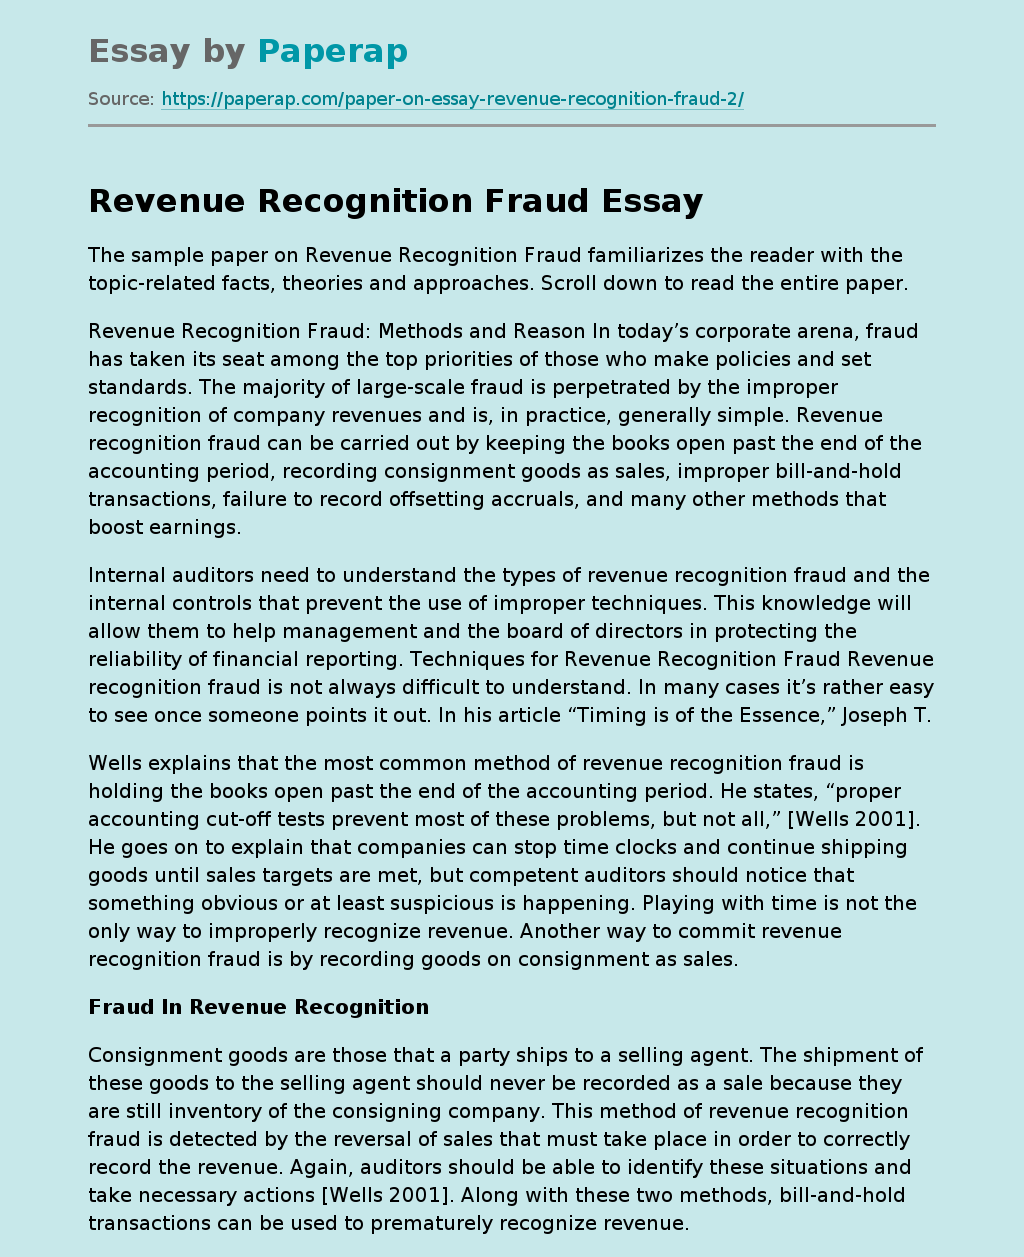 Revenue Recognition Fraud: Methods and Reason